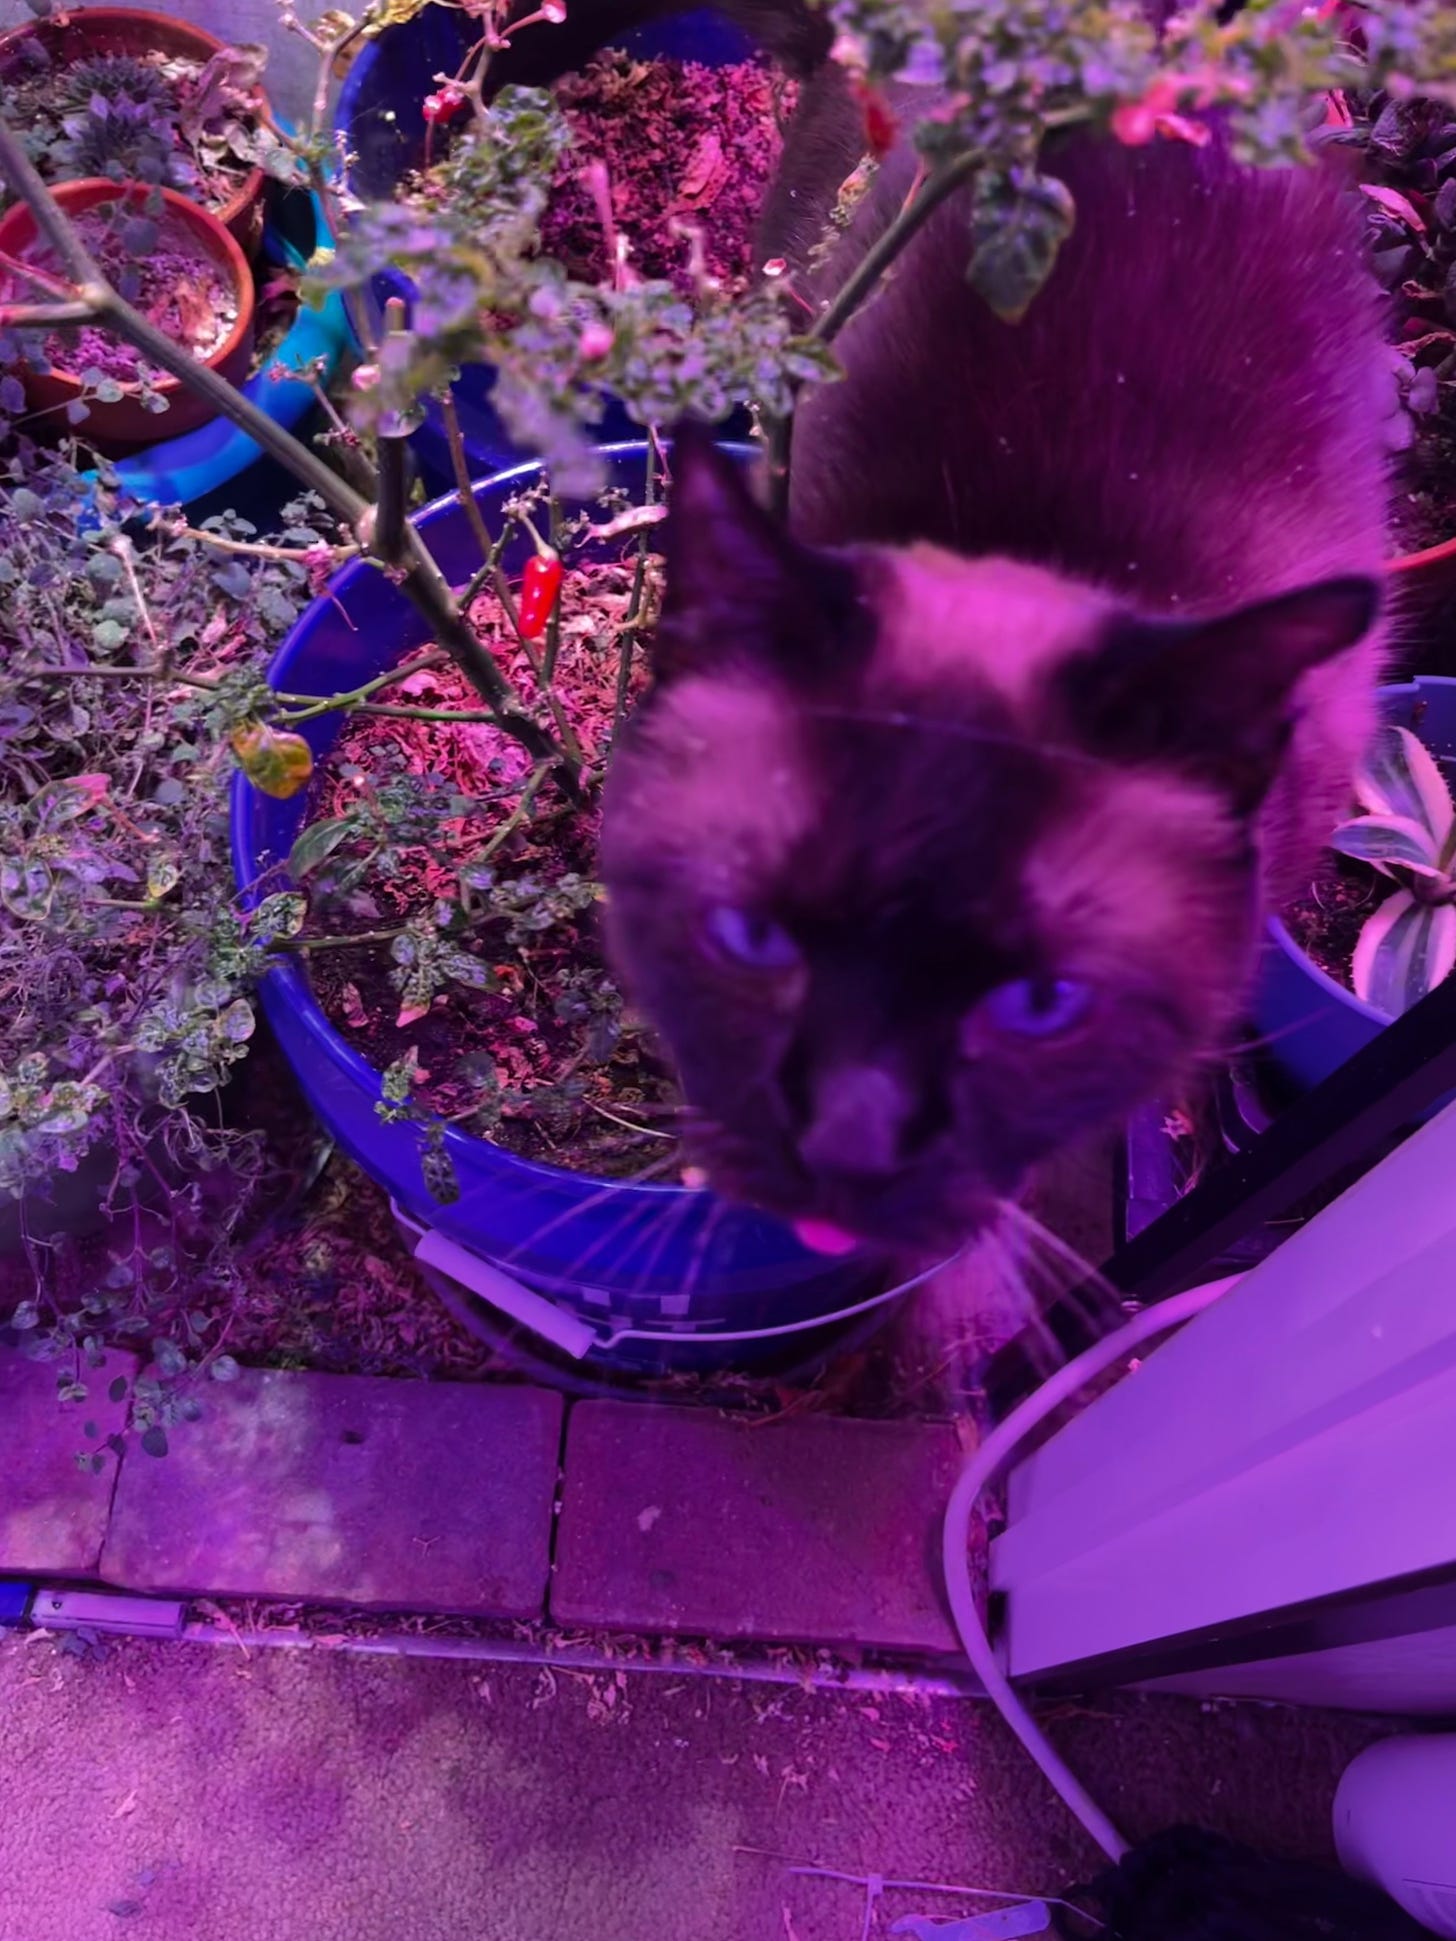 A Siamese cat with her tongue out standing in a bucket growing peppers